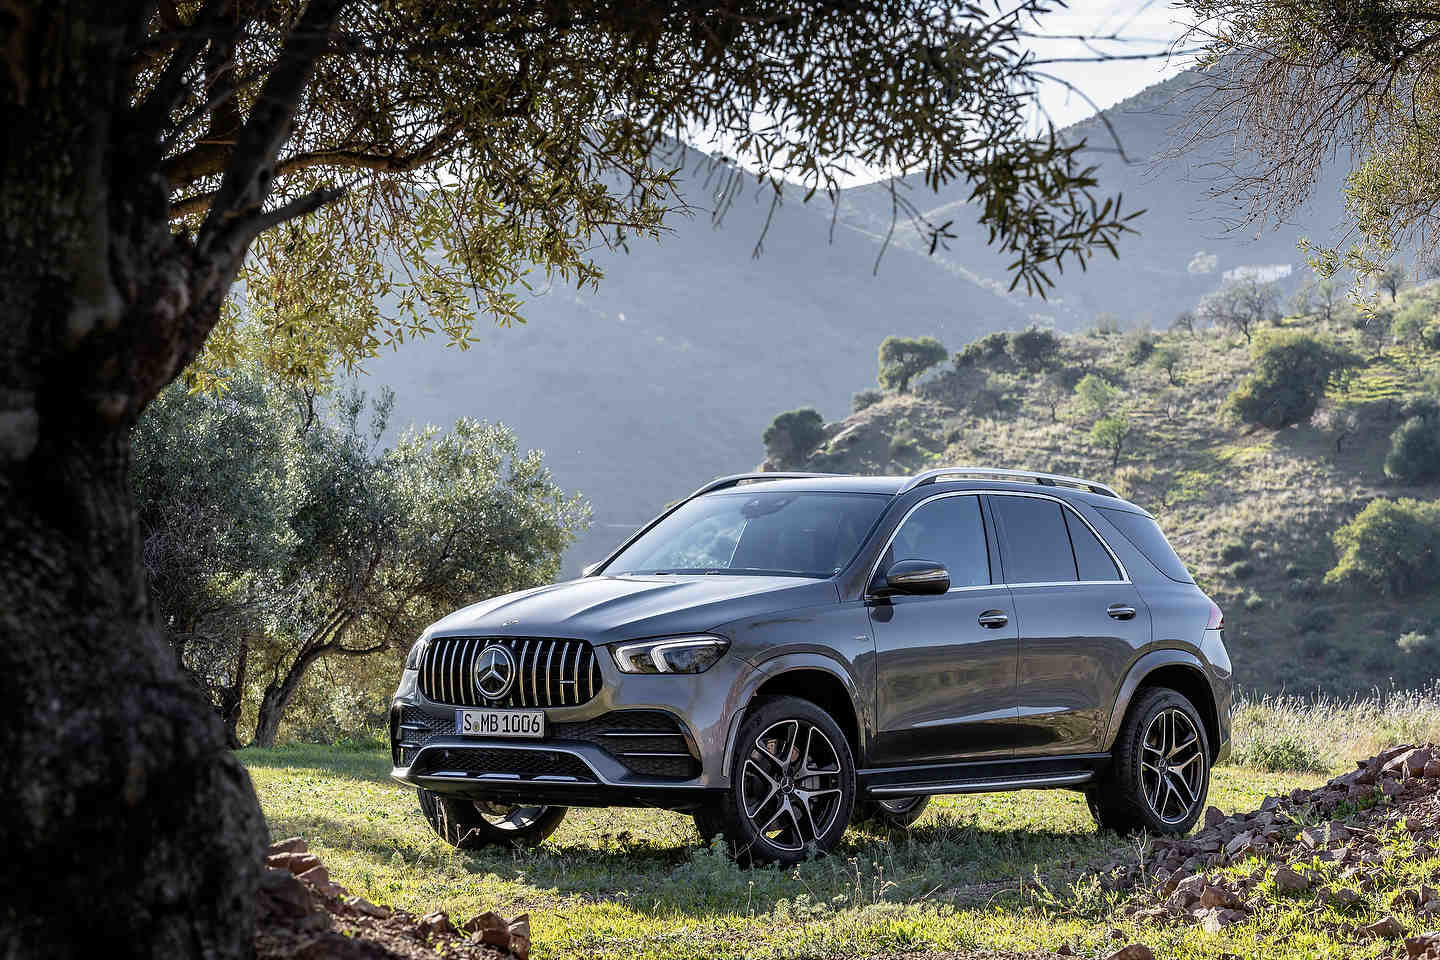 2021 Mercedes-Benz GLE vs. 2021 Volvo XC90: The GLE Leads the Way